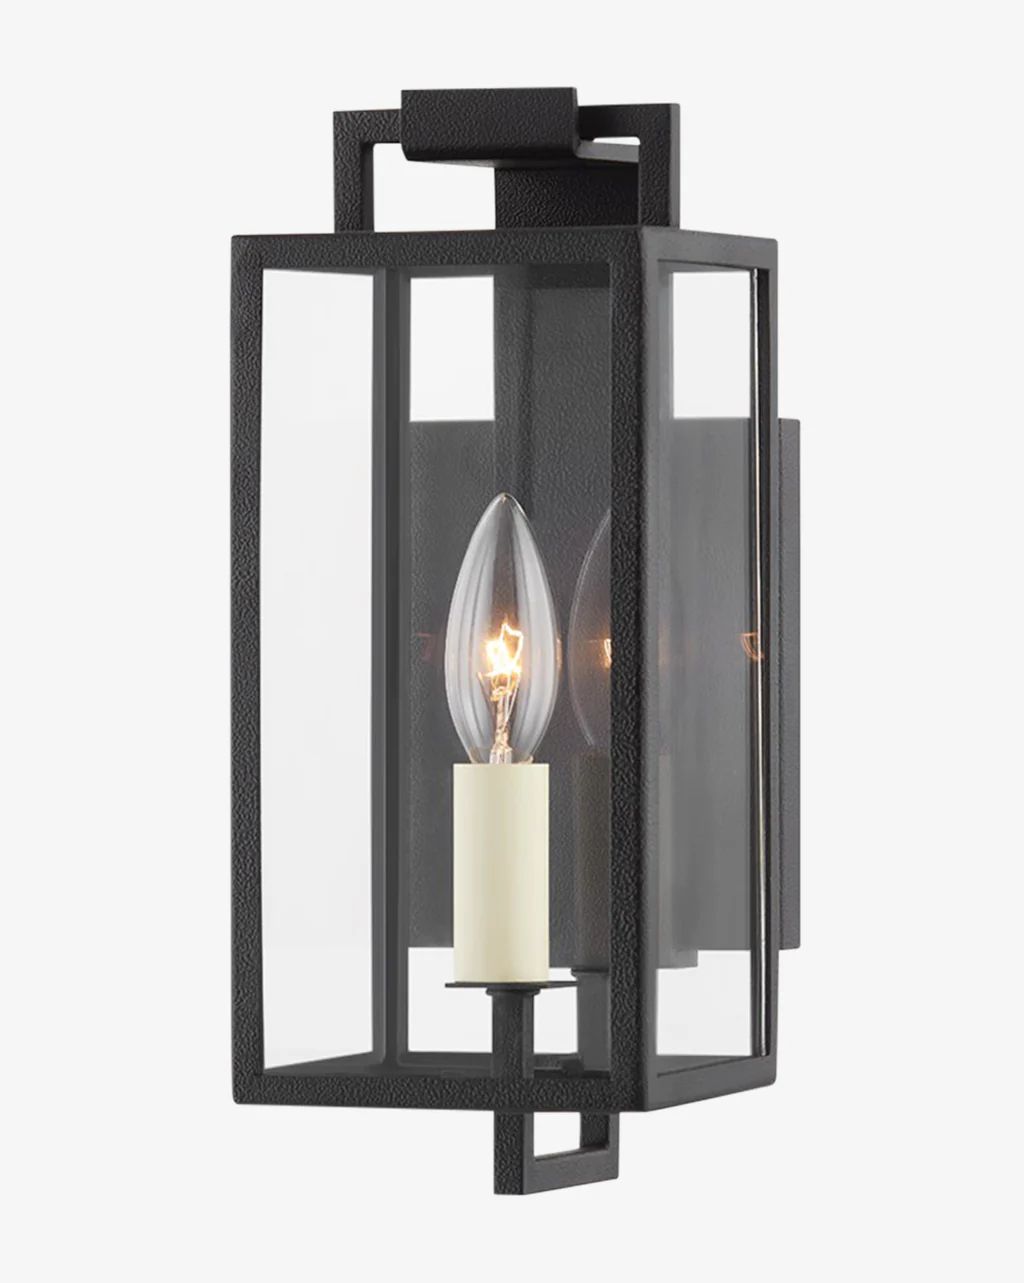 Beckham Wall Sconce | McGee & Co.